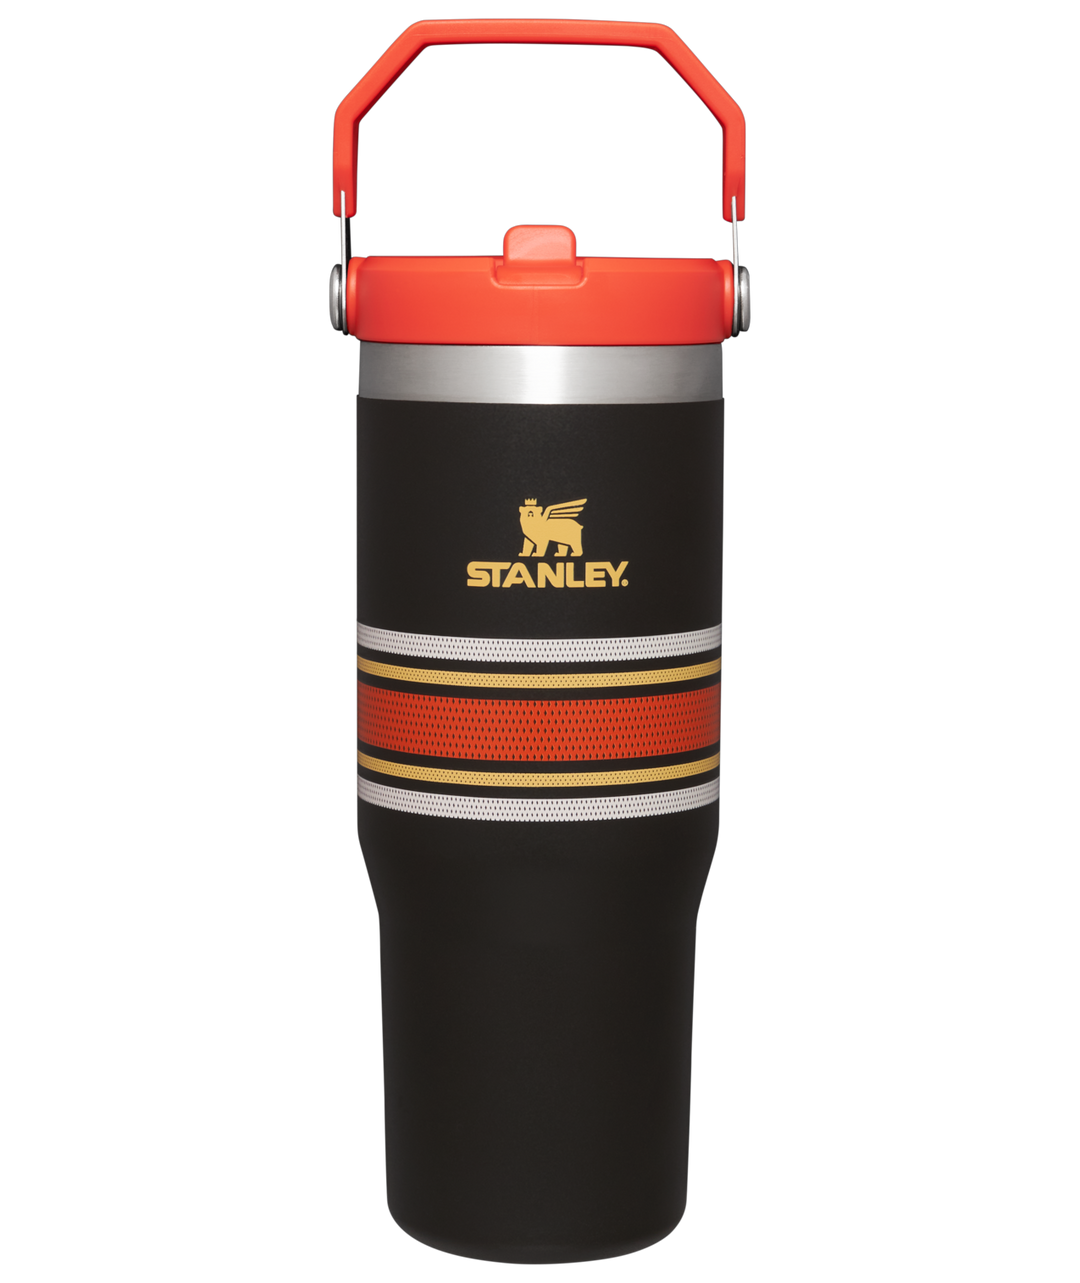 The new tumblers, the perfect combination of LV and Stanley, is